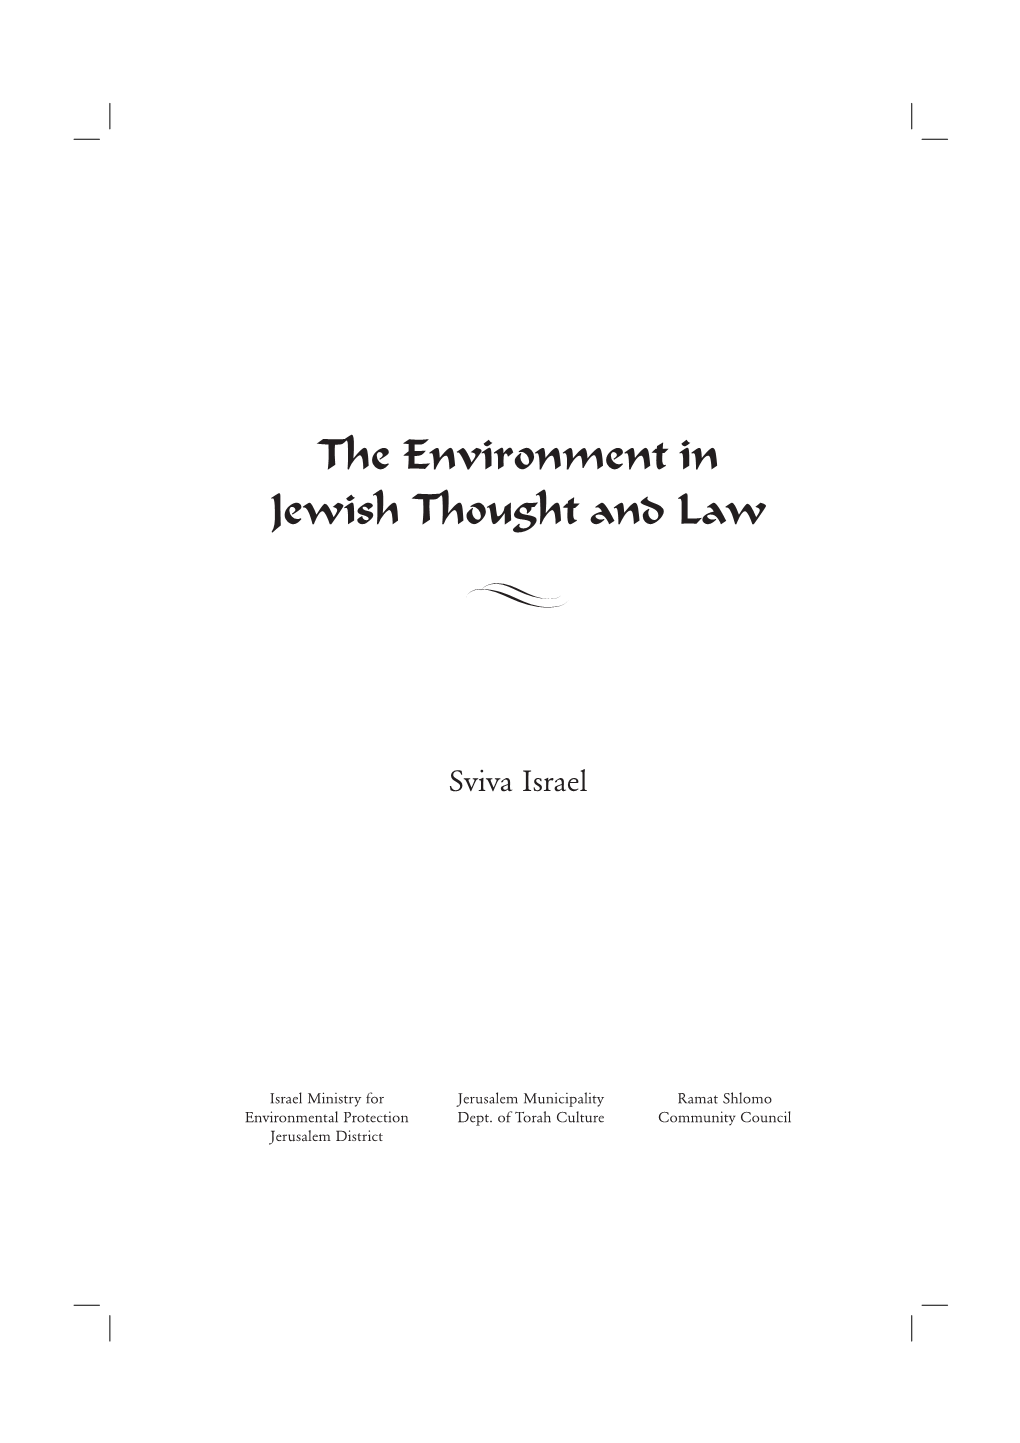 The Environment in Jewish Thought and Law